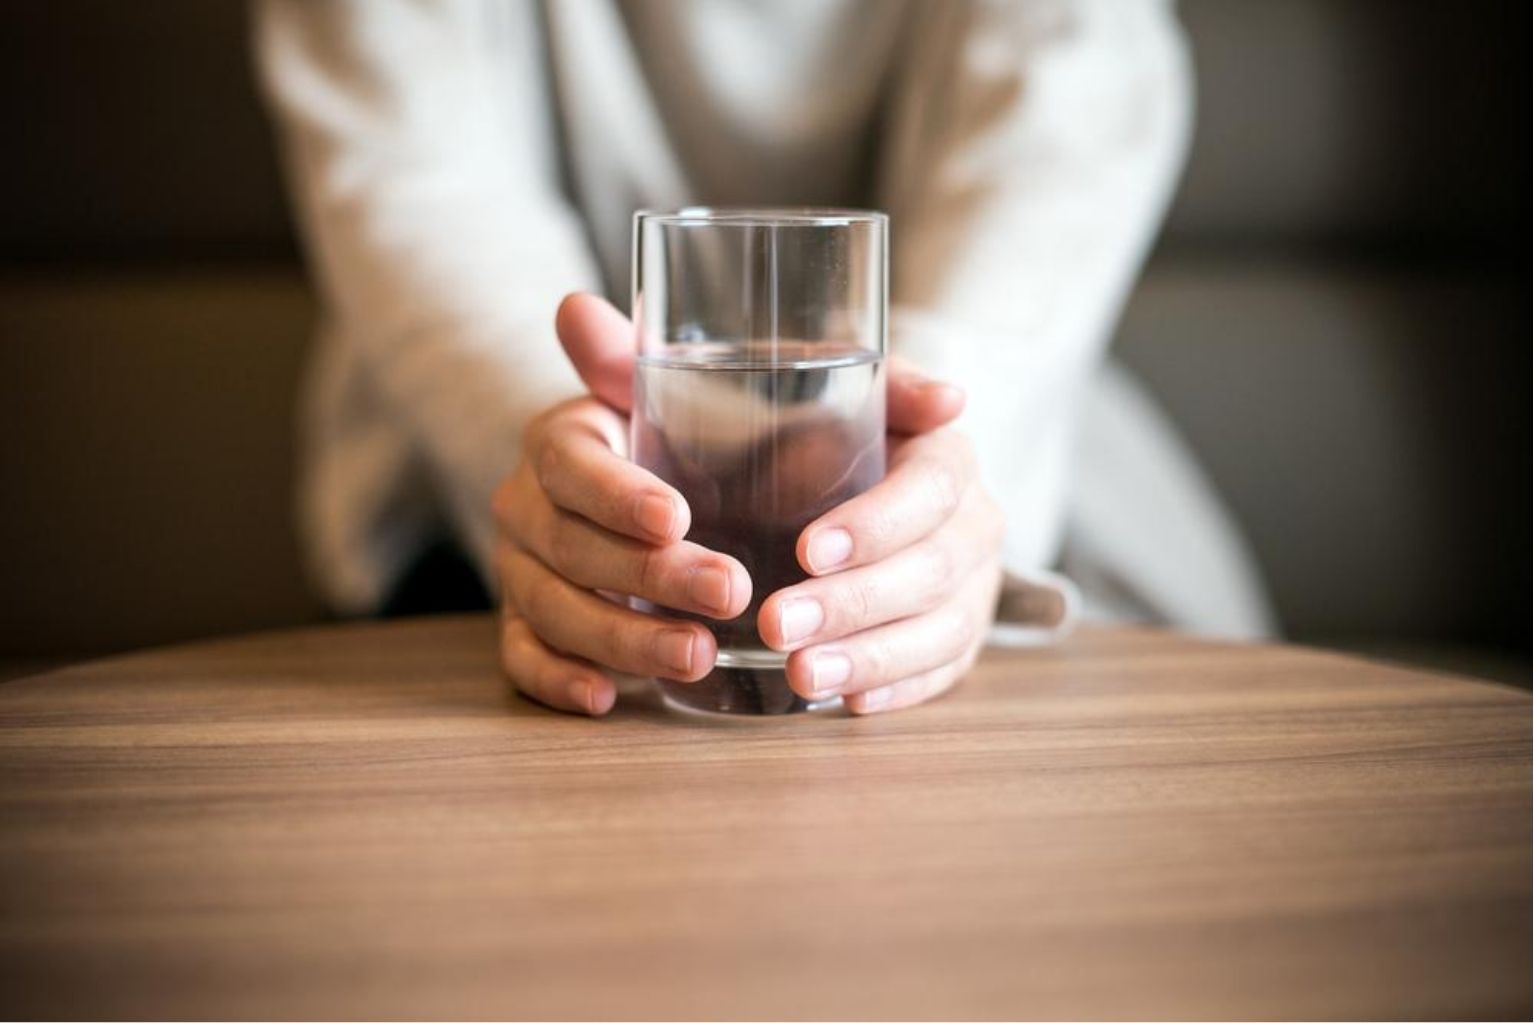 Woman sitting at a table holding a clear glass filled with water